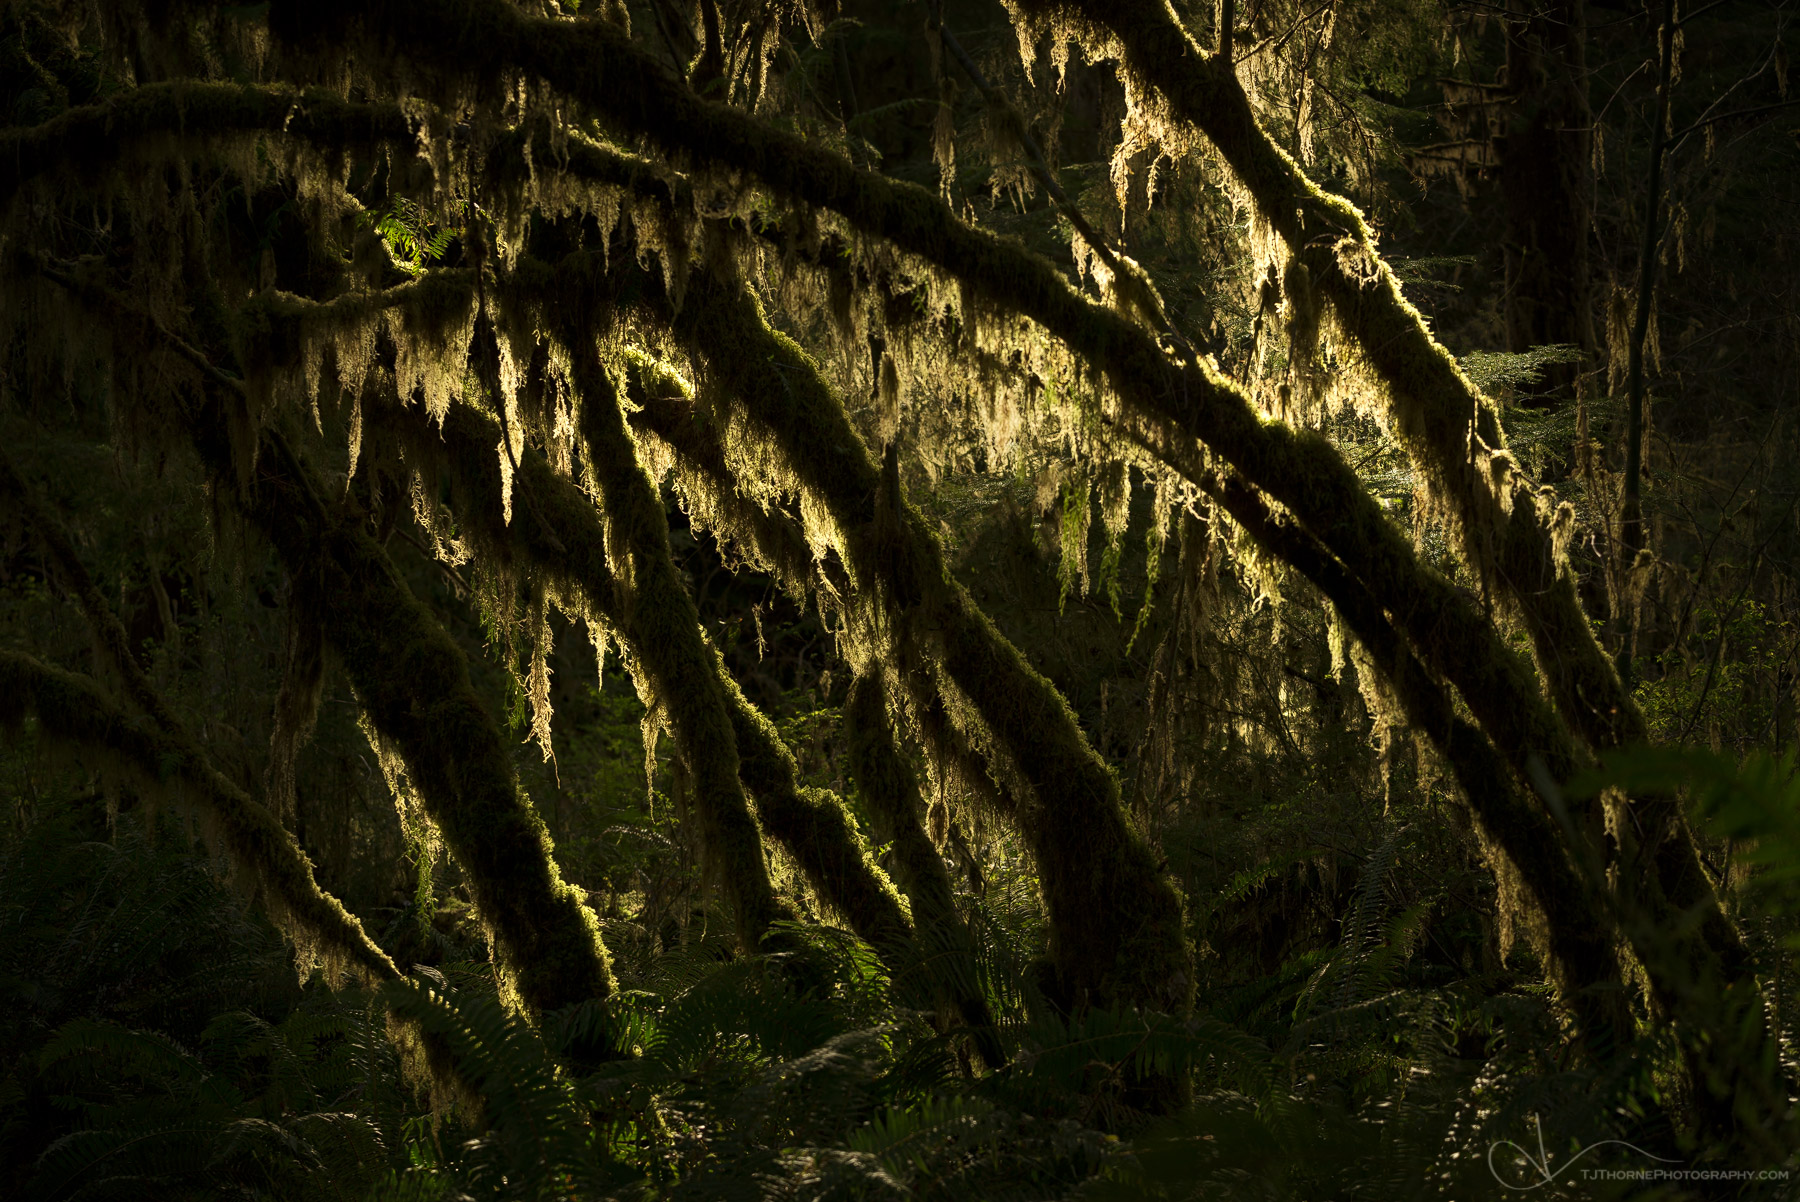 FINE ART LIMITED EDITION OF 100 Mossy vine maples in Olympic National Park, Washington.